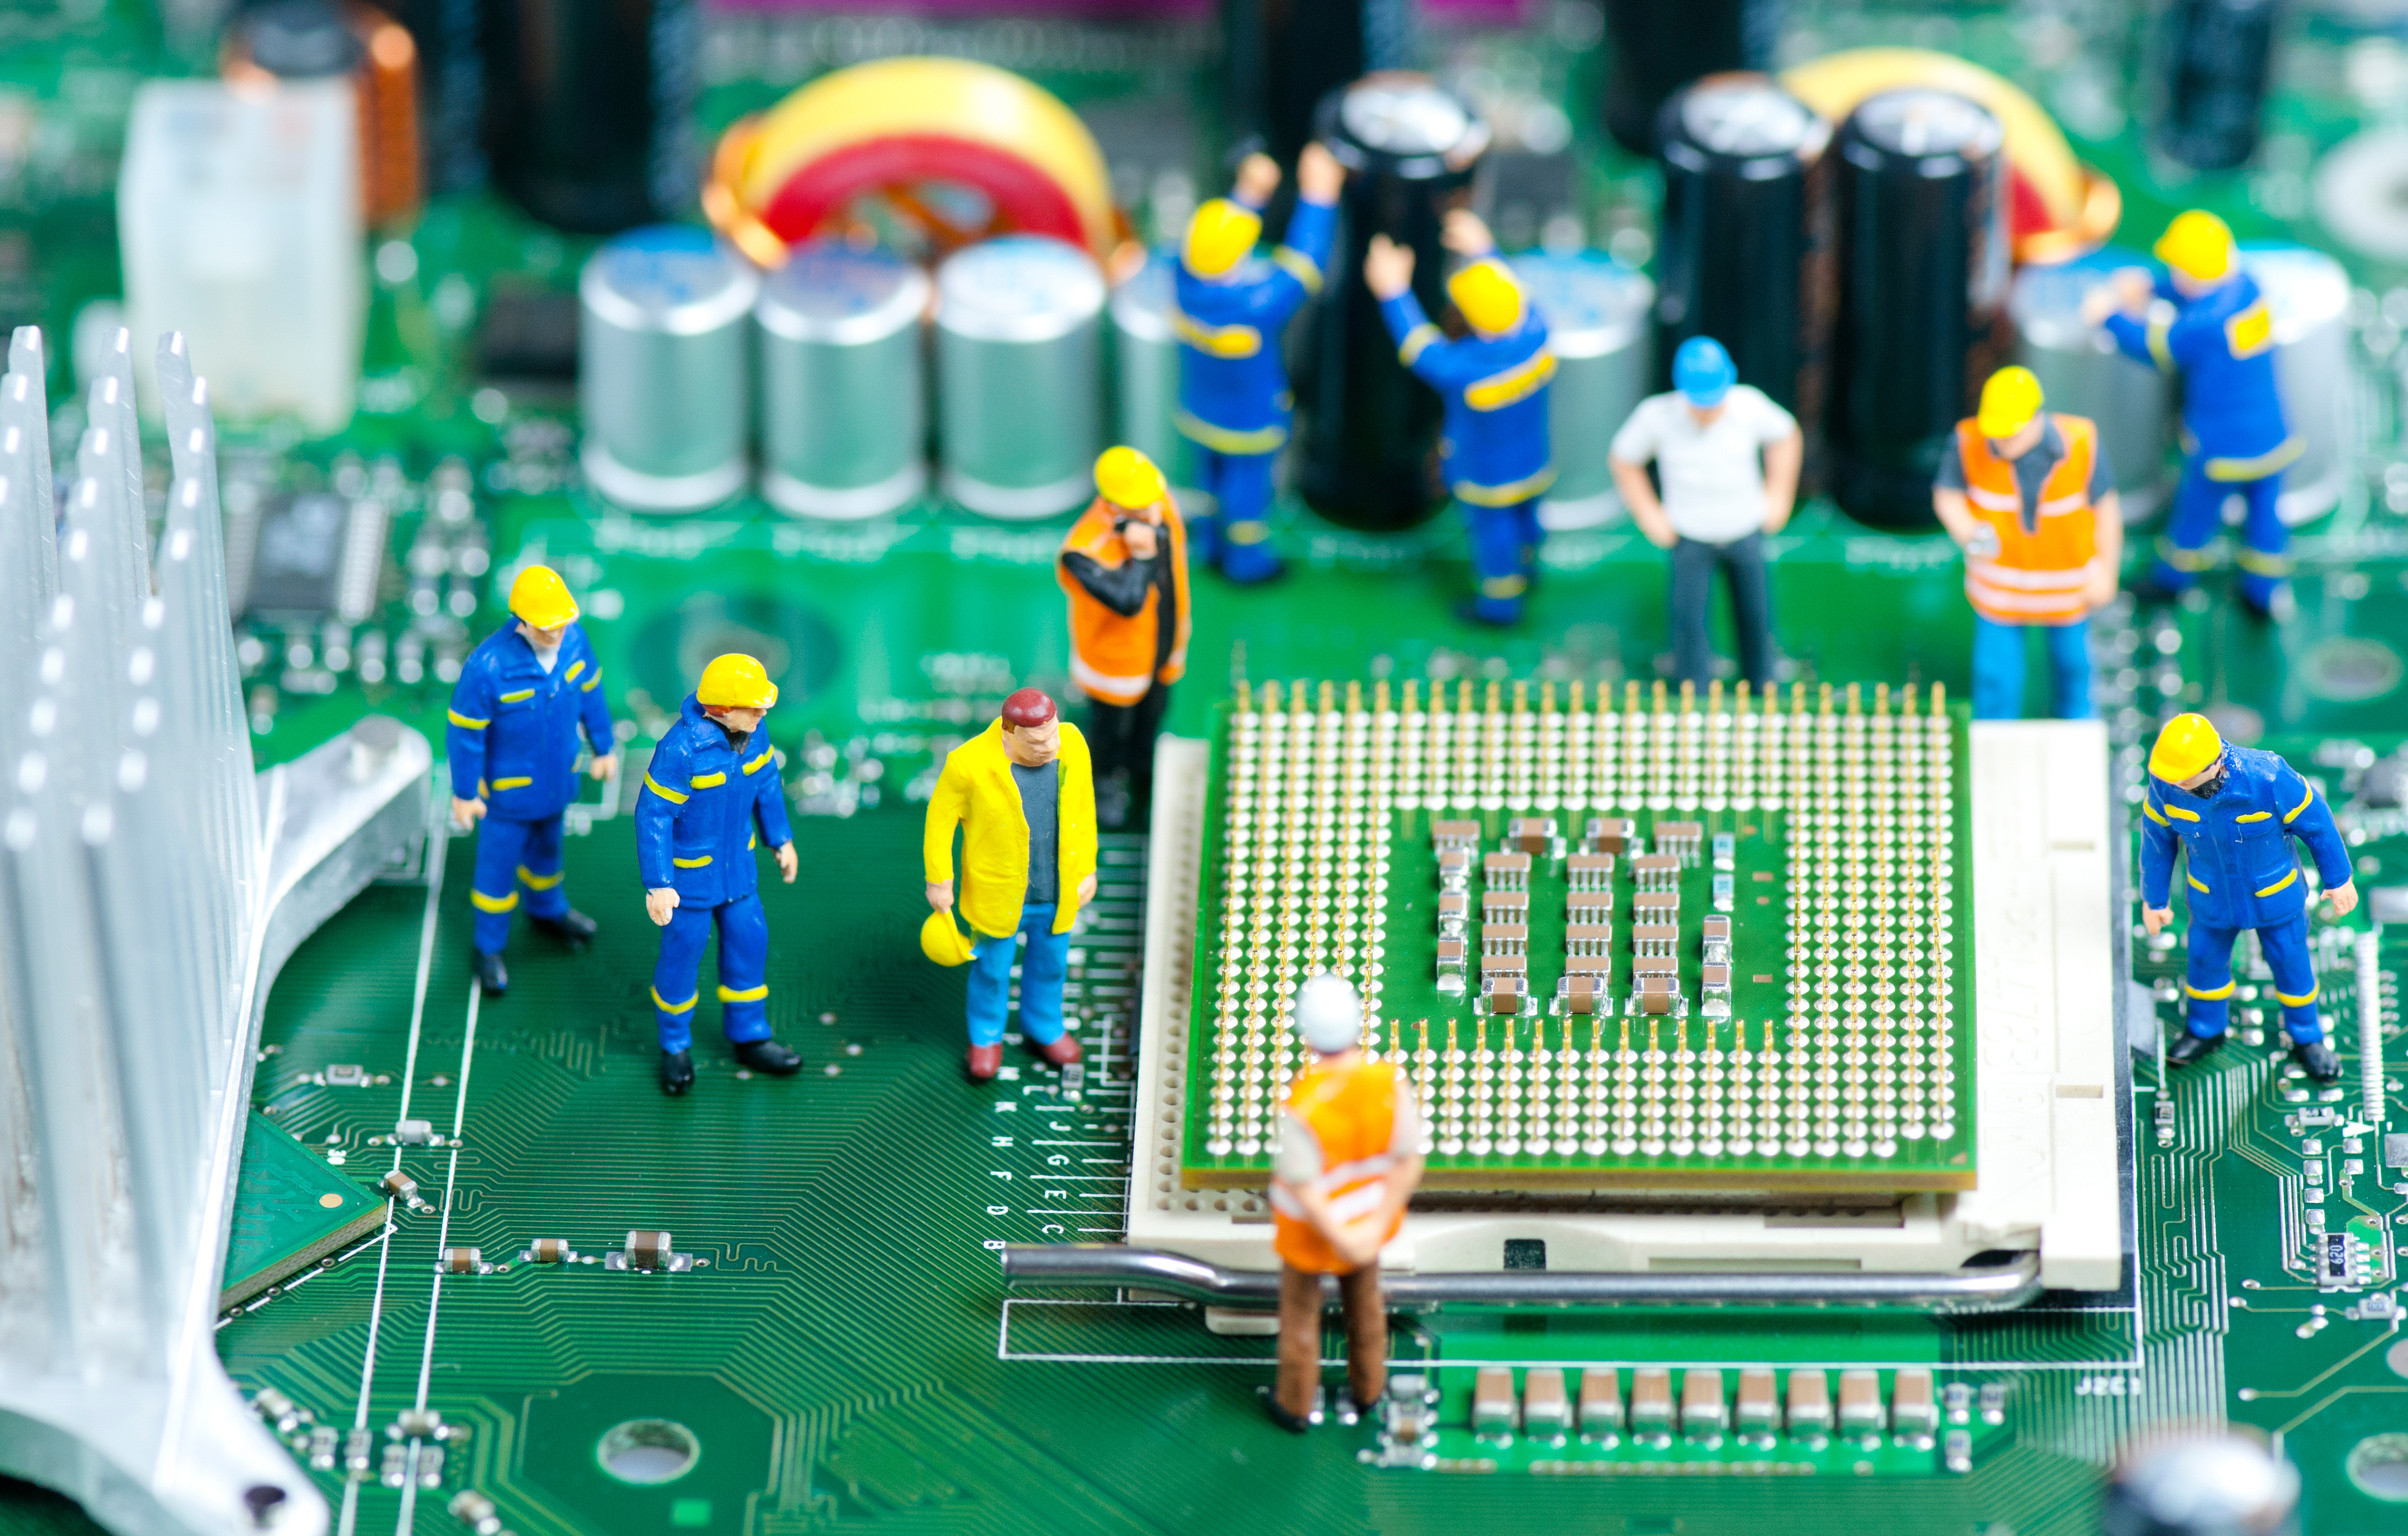 Group of miniature engineers inspecting computer processor